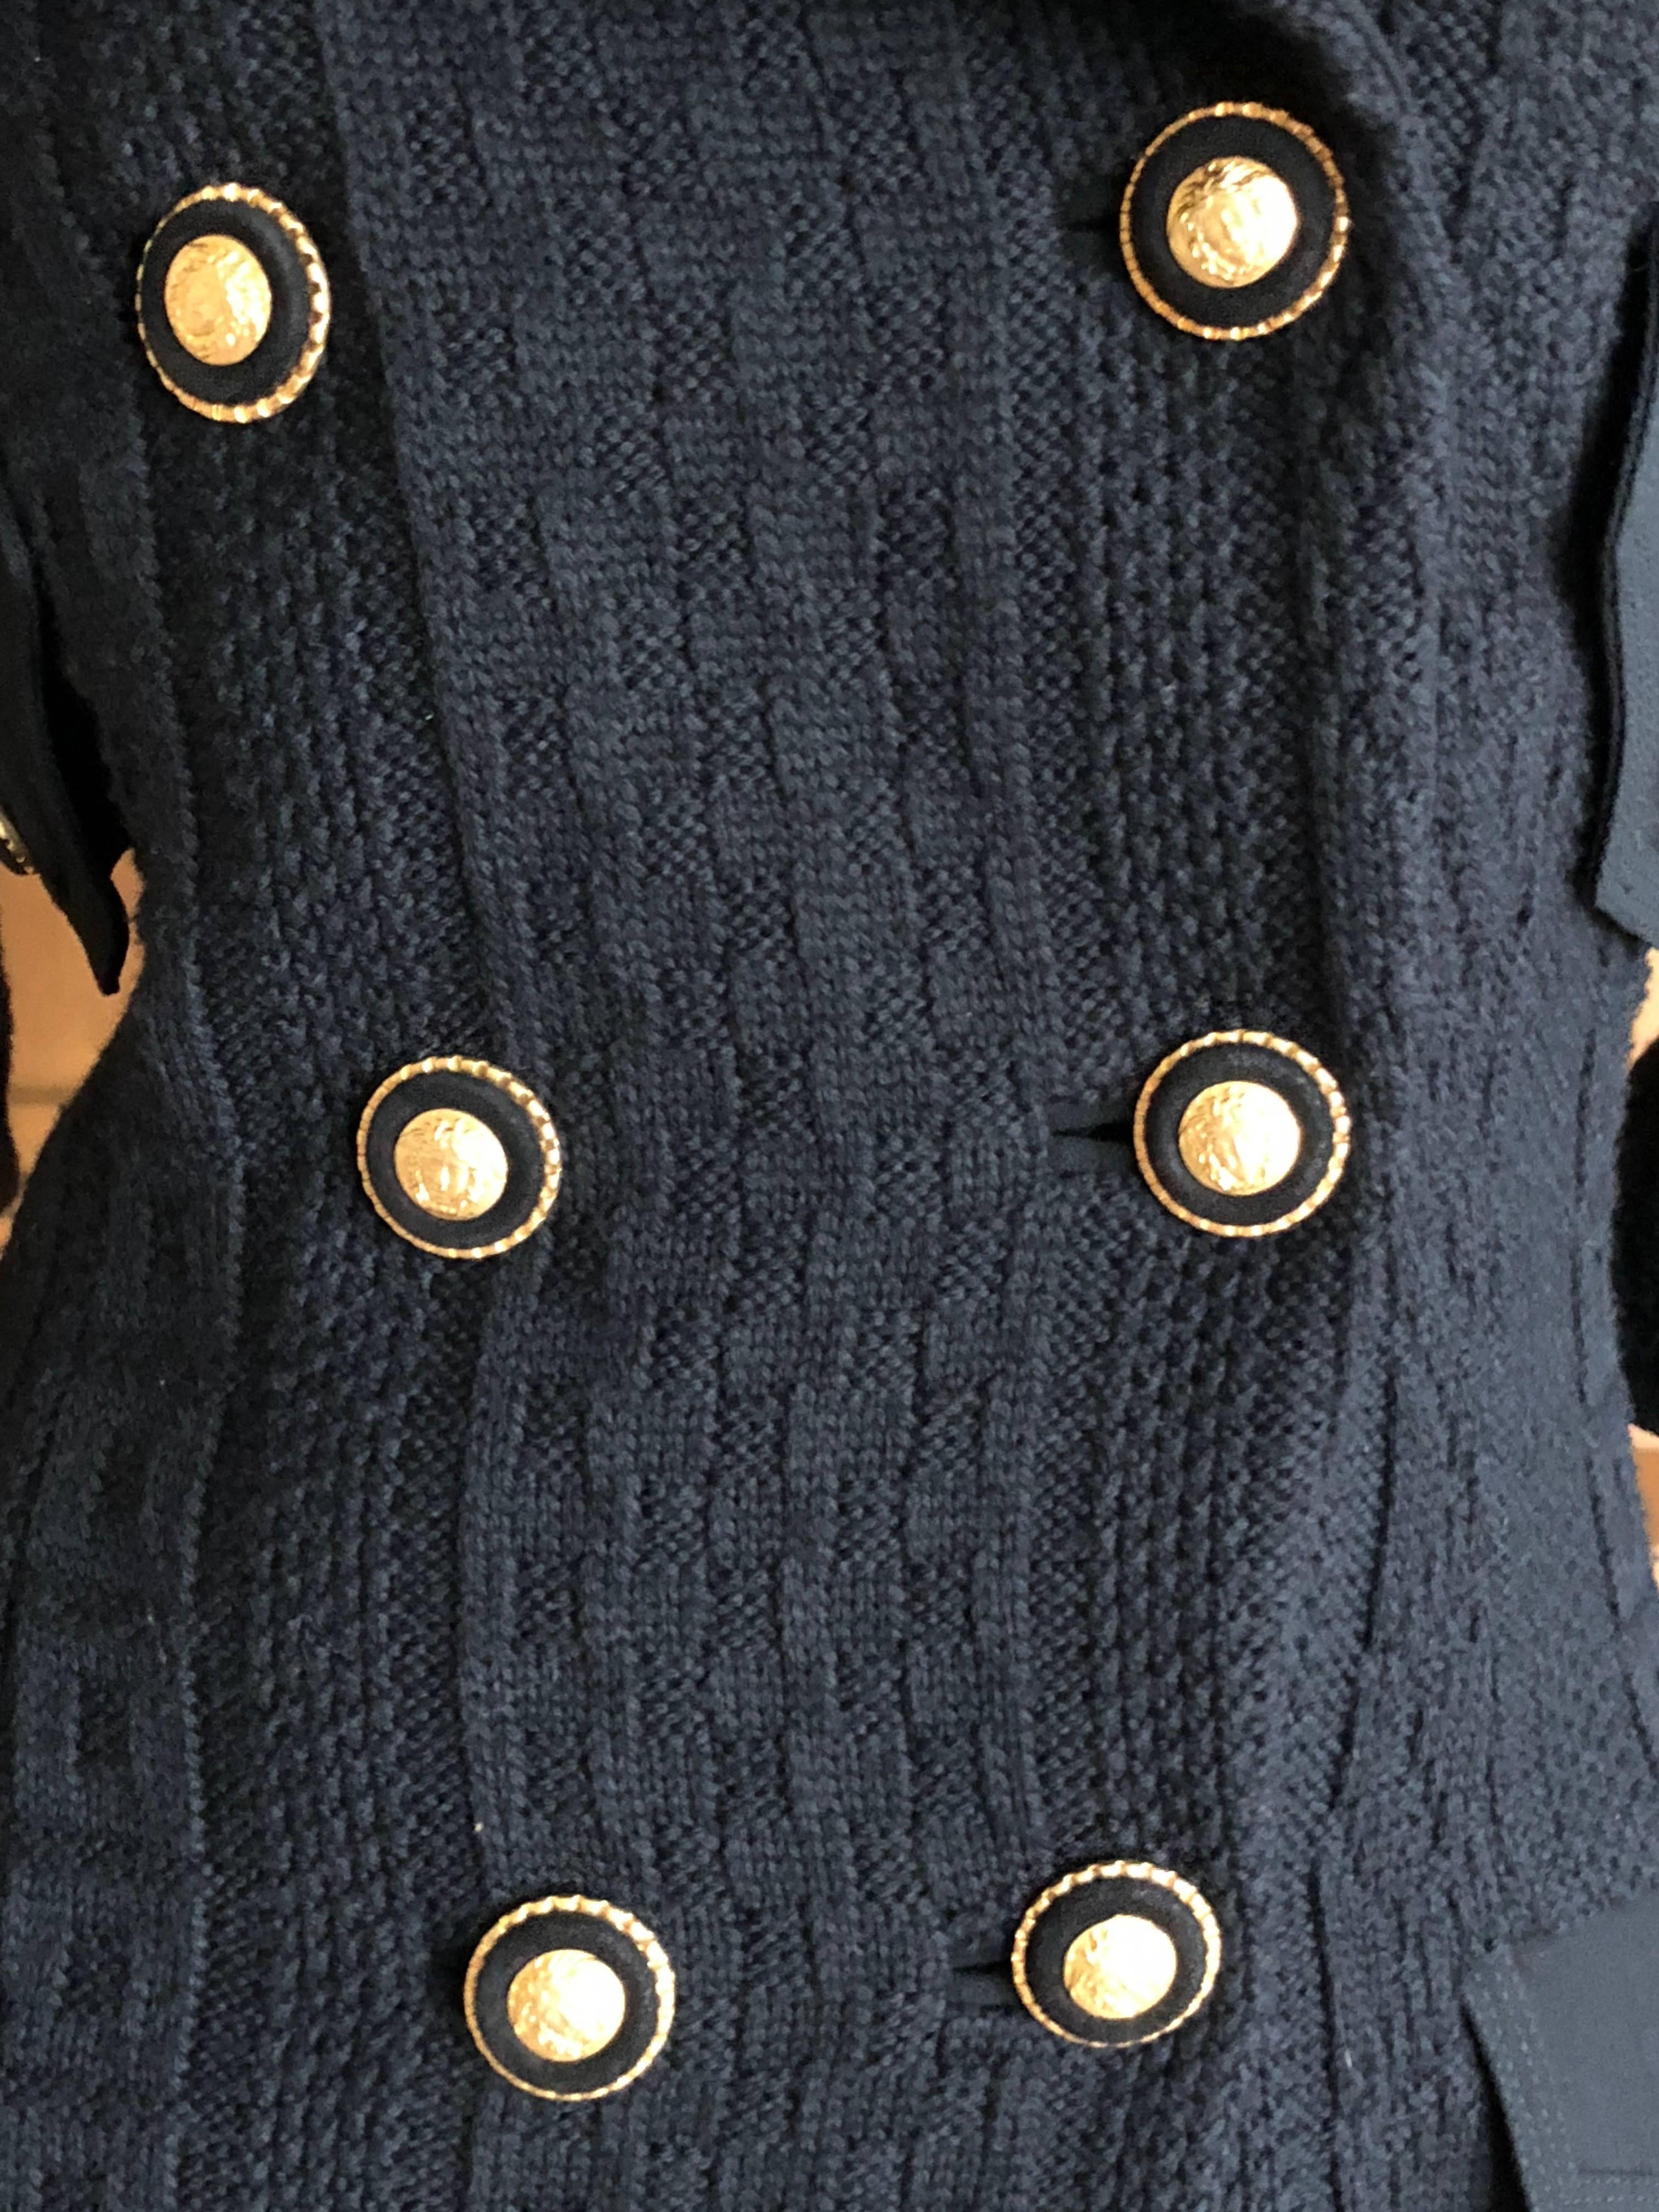 Gianni Versace Couture 1980's Black Knit Jacket with Medusa Buttons 3